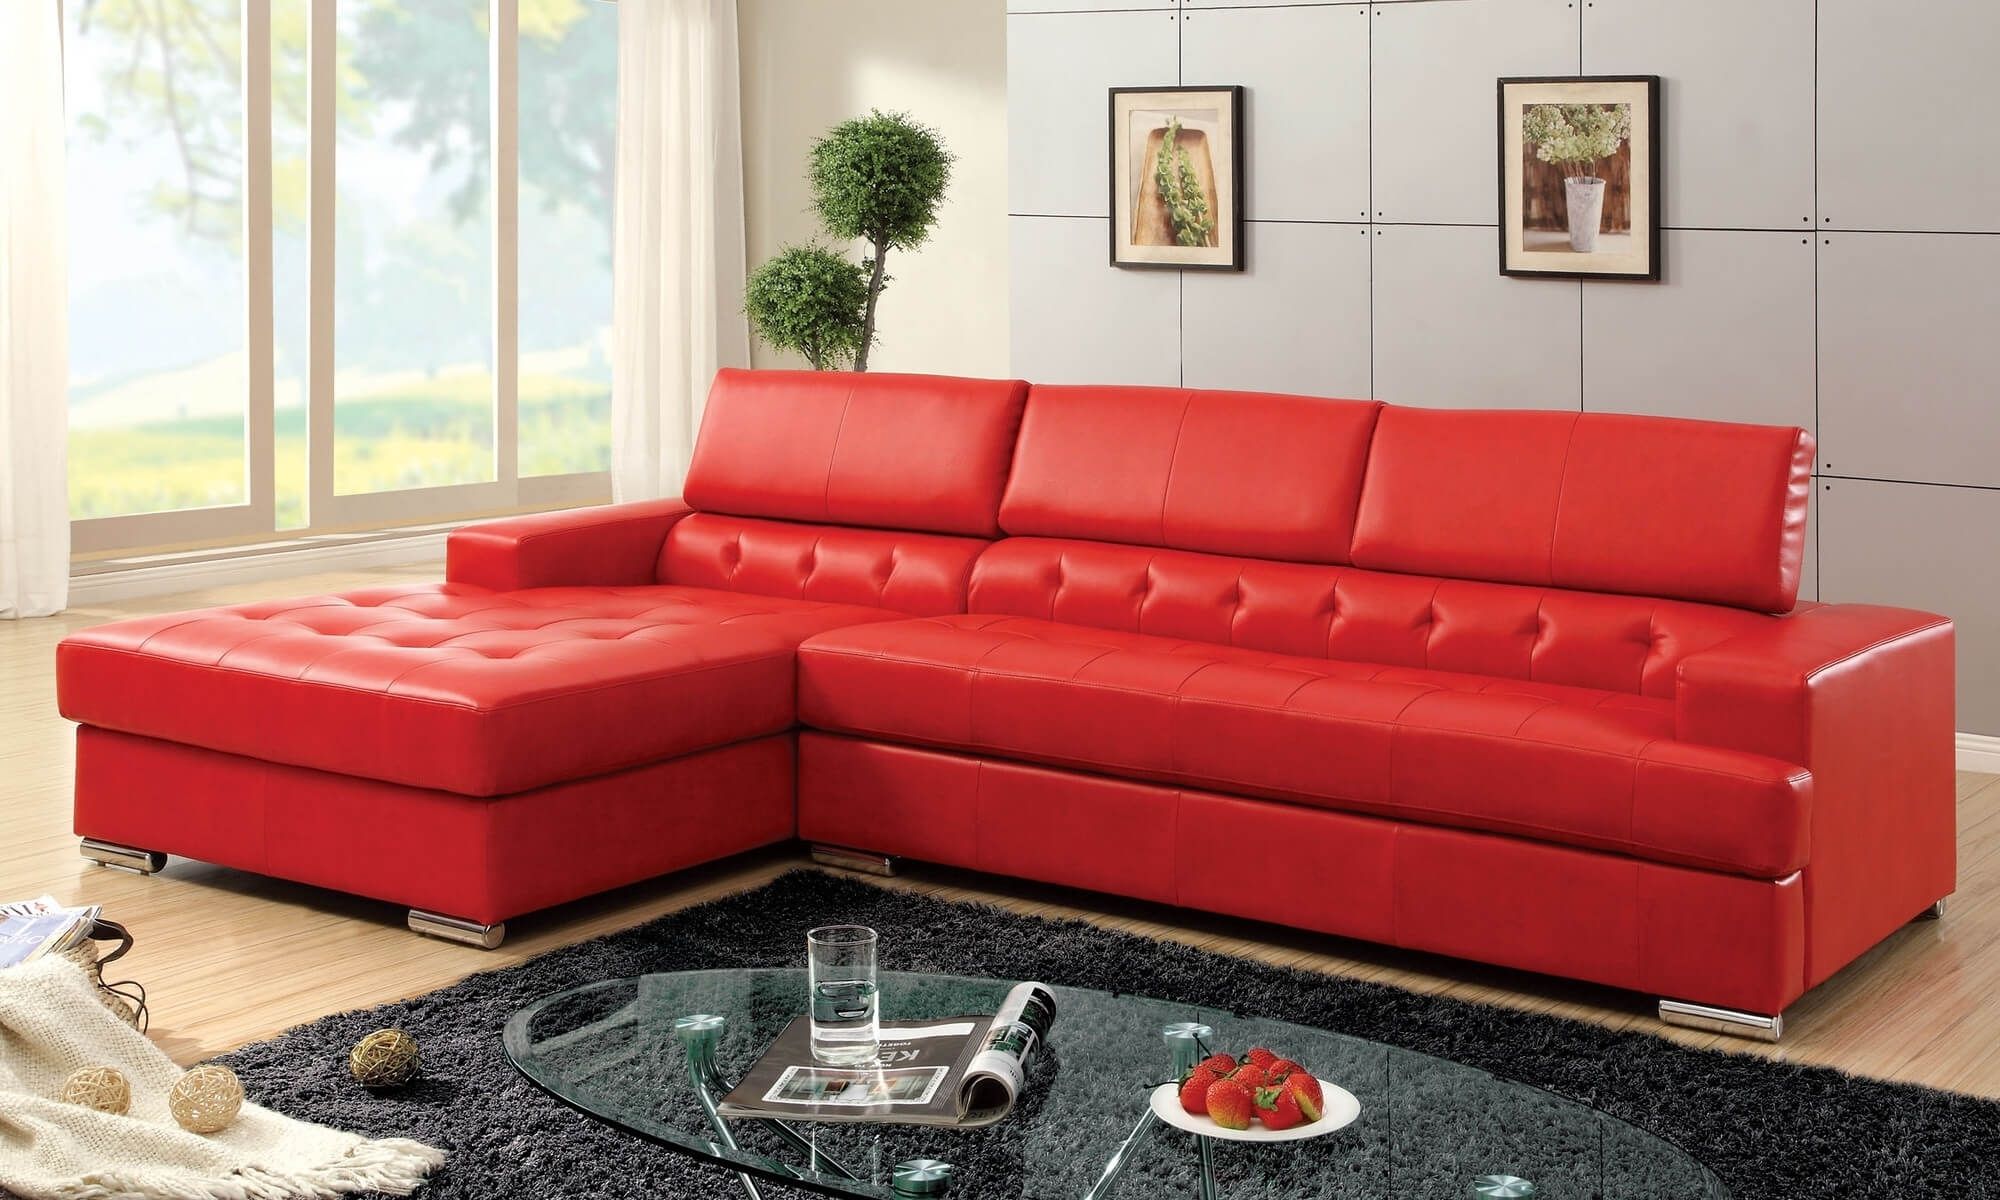 New Red Leather Sectional Sofa With Chaise Best Sectional Sofa Ideas Inside Red Leather Sectionals With Chaise 